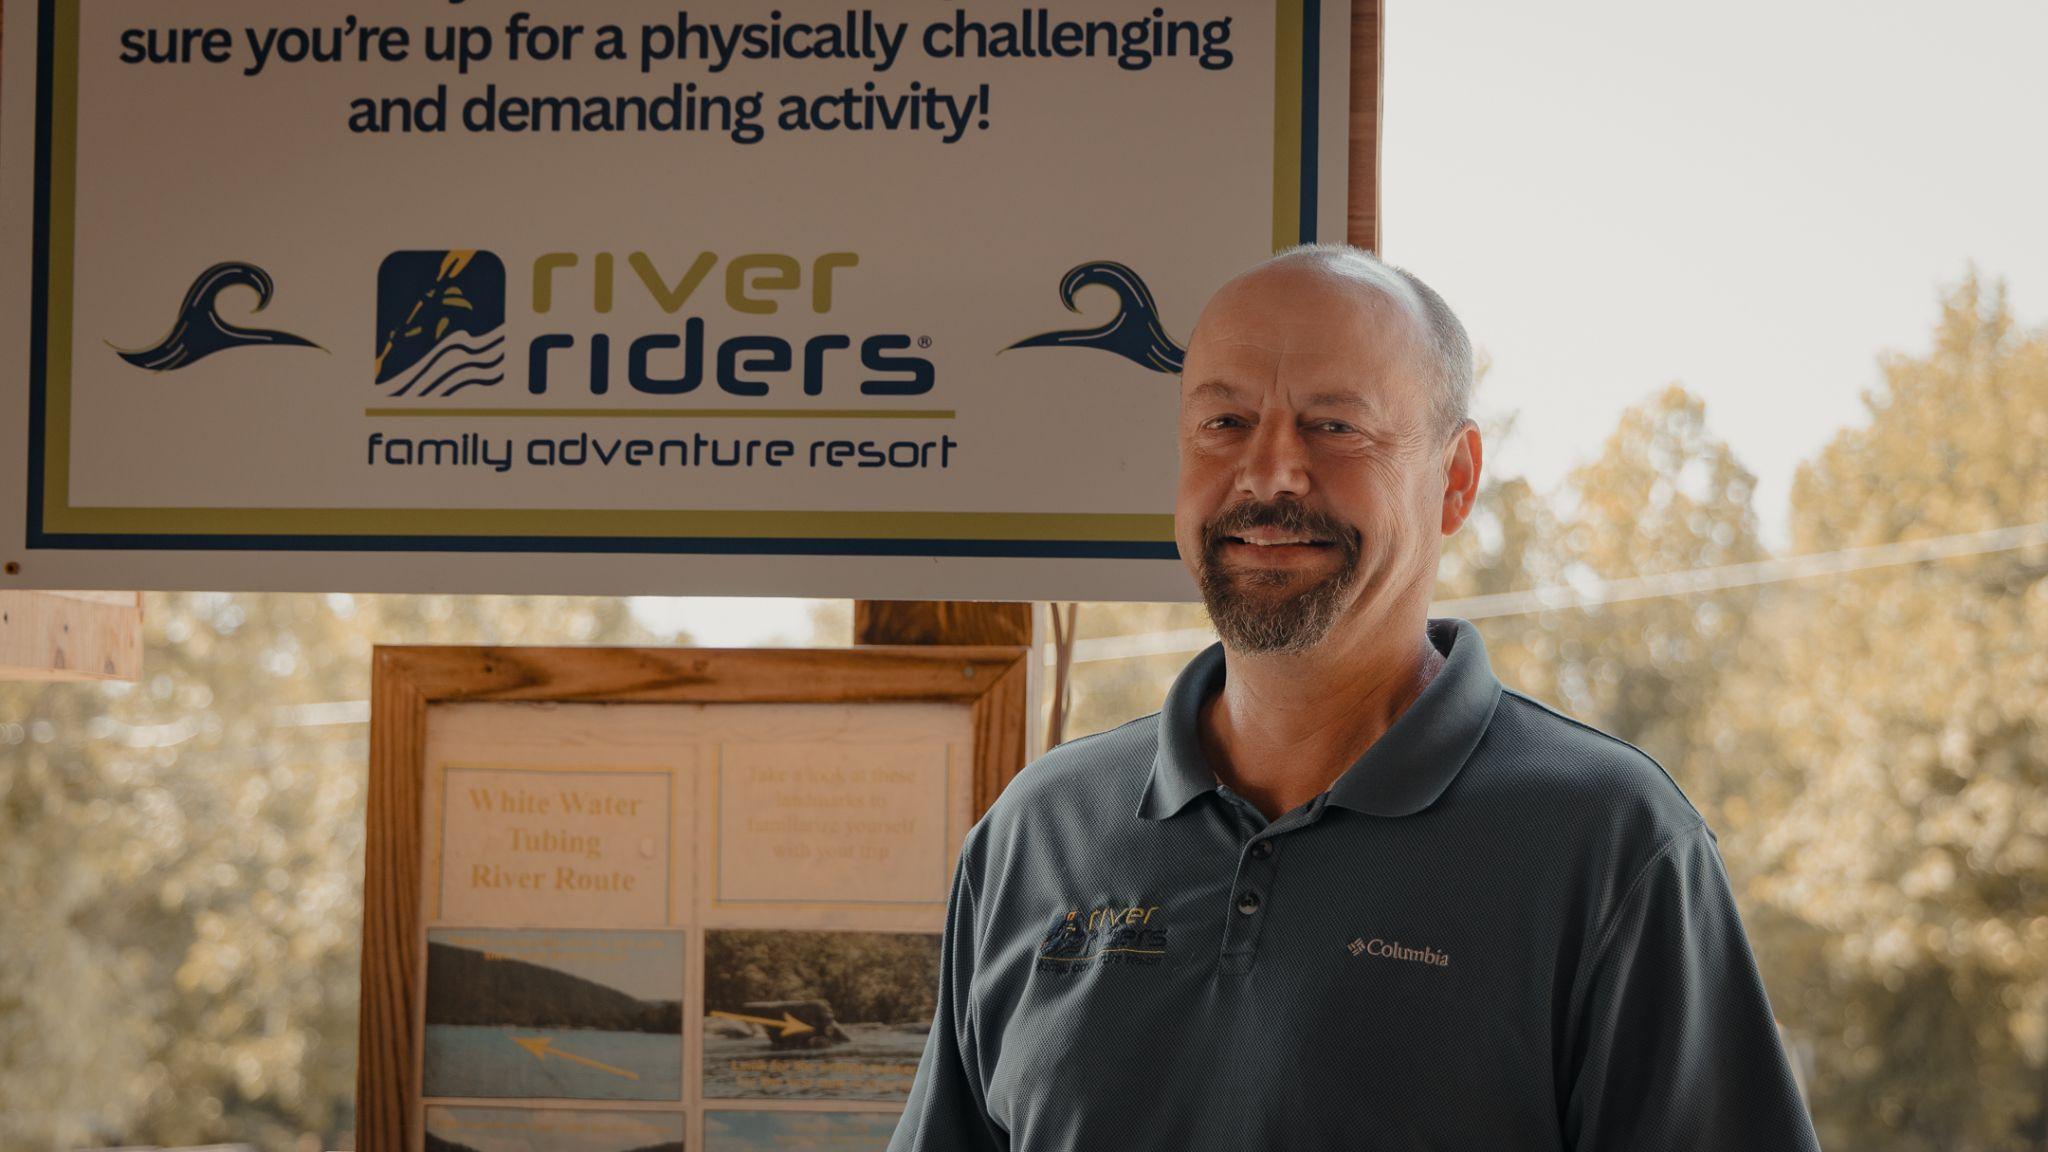 River Riders: Year round activities and fun with help of long standing partnership with the WV SBDC